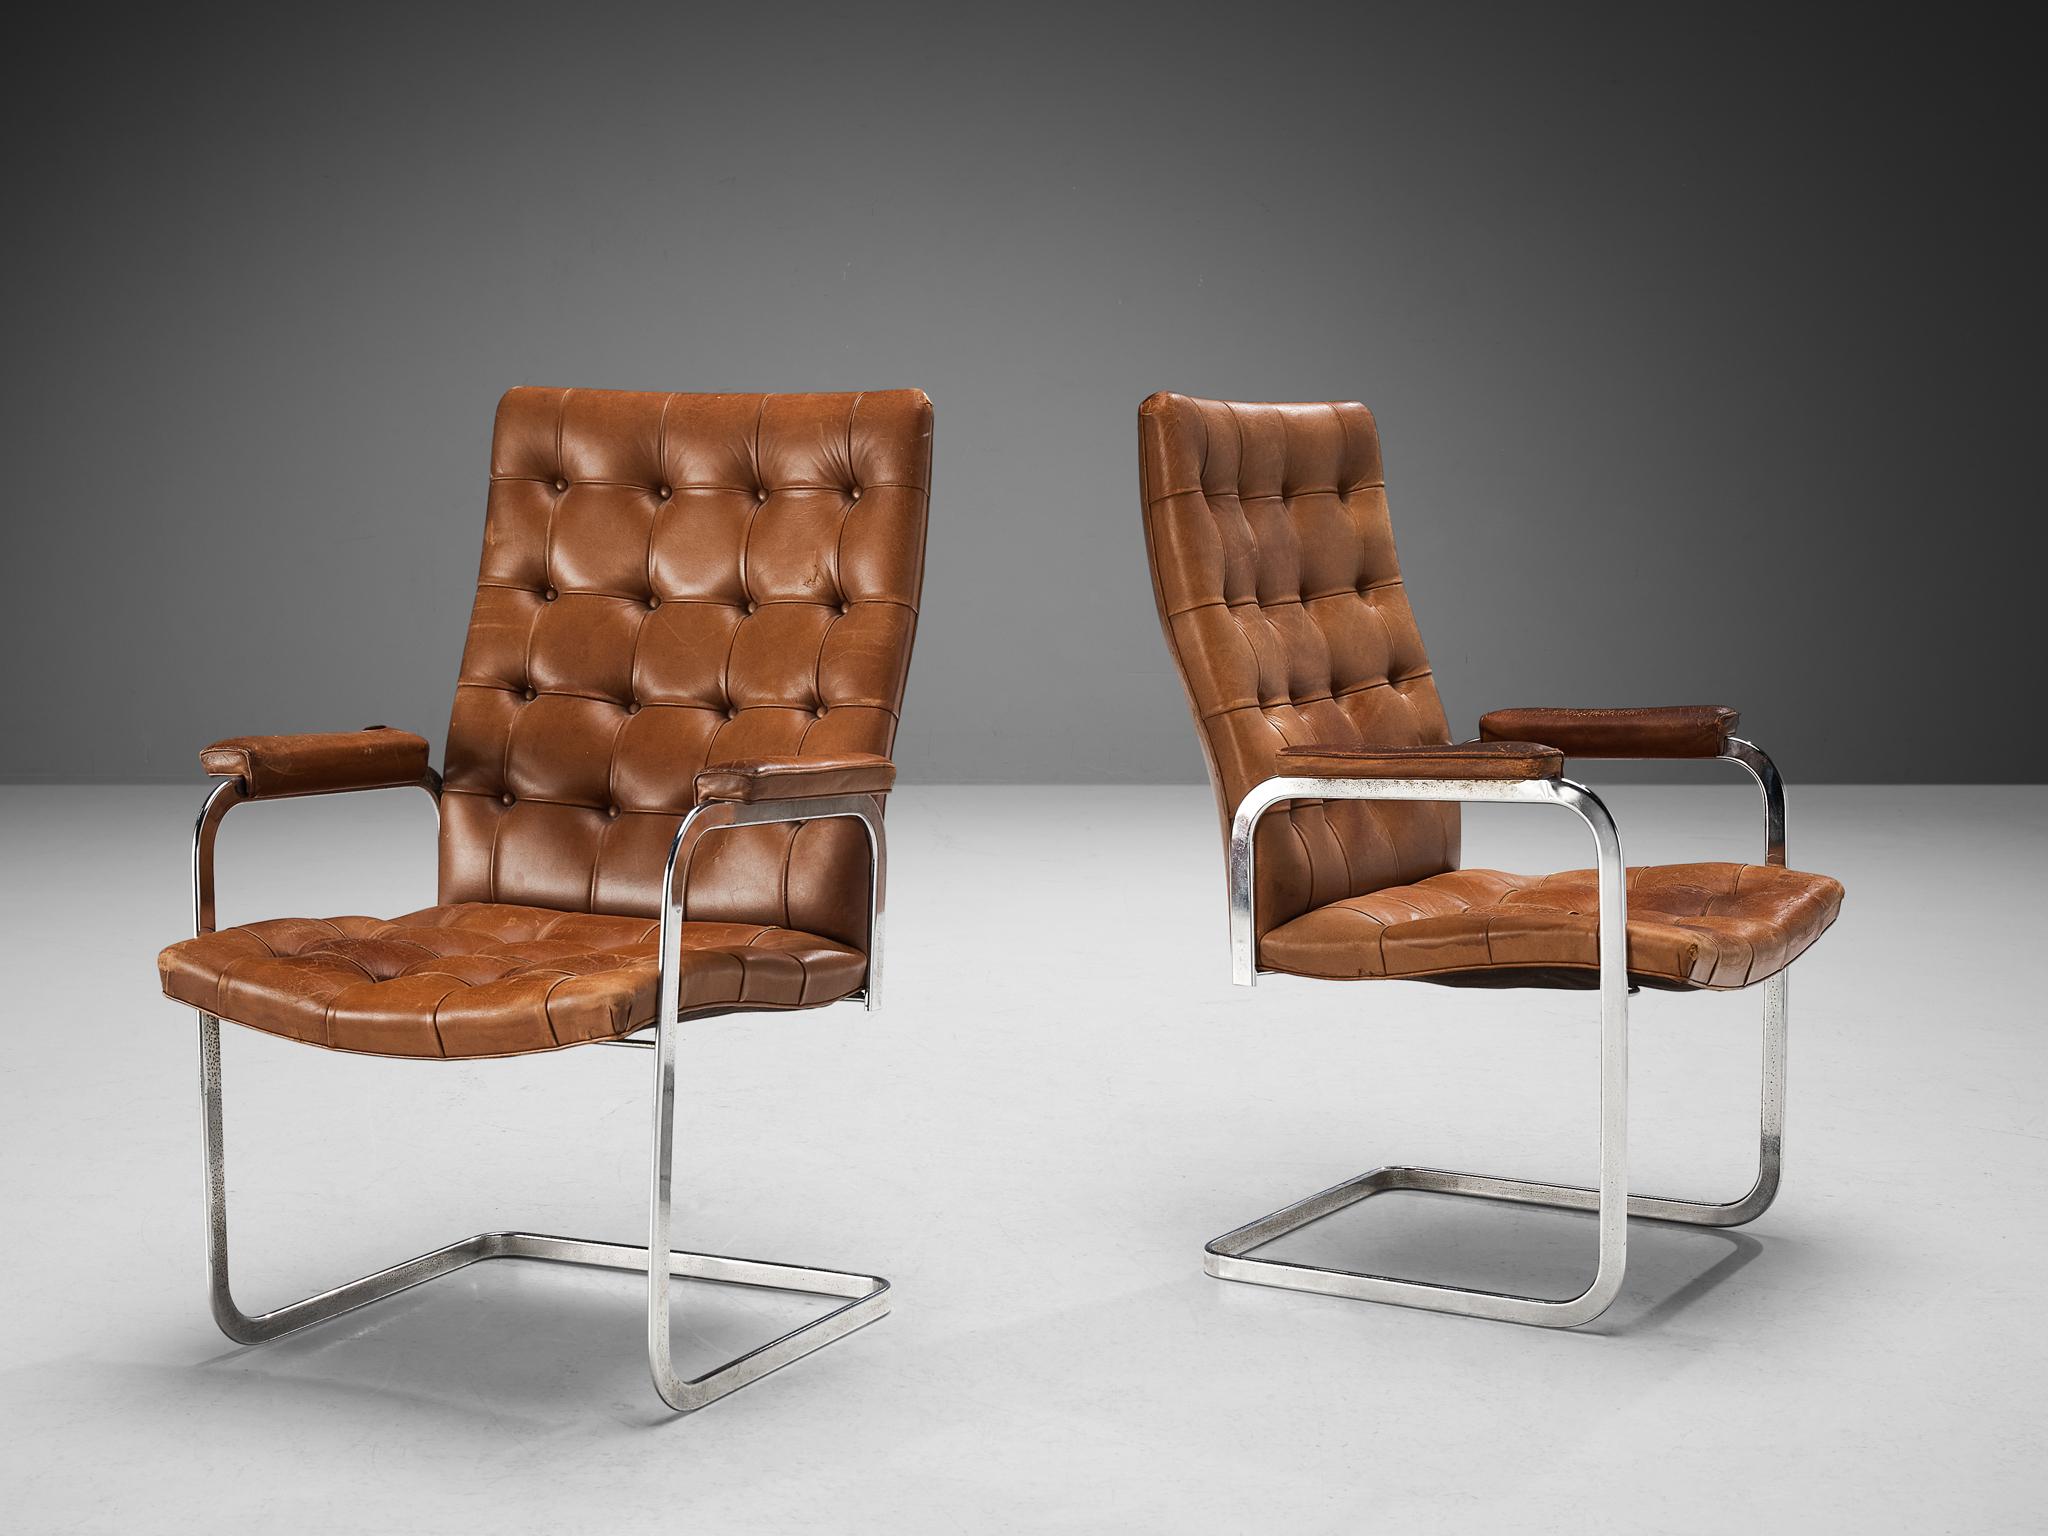 Robert Haussmann for De Sede, pair of armchairs, model 'RH-304', leather and steel, Switzerland, ca. 1950. 

This cantilevered pair of tufted chairs with leather padded armrests is designed by Robert Haussmann for De Sede. The set has a business